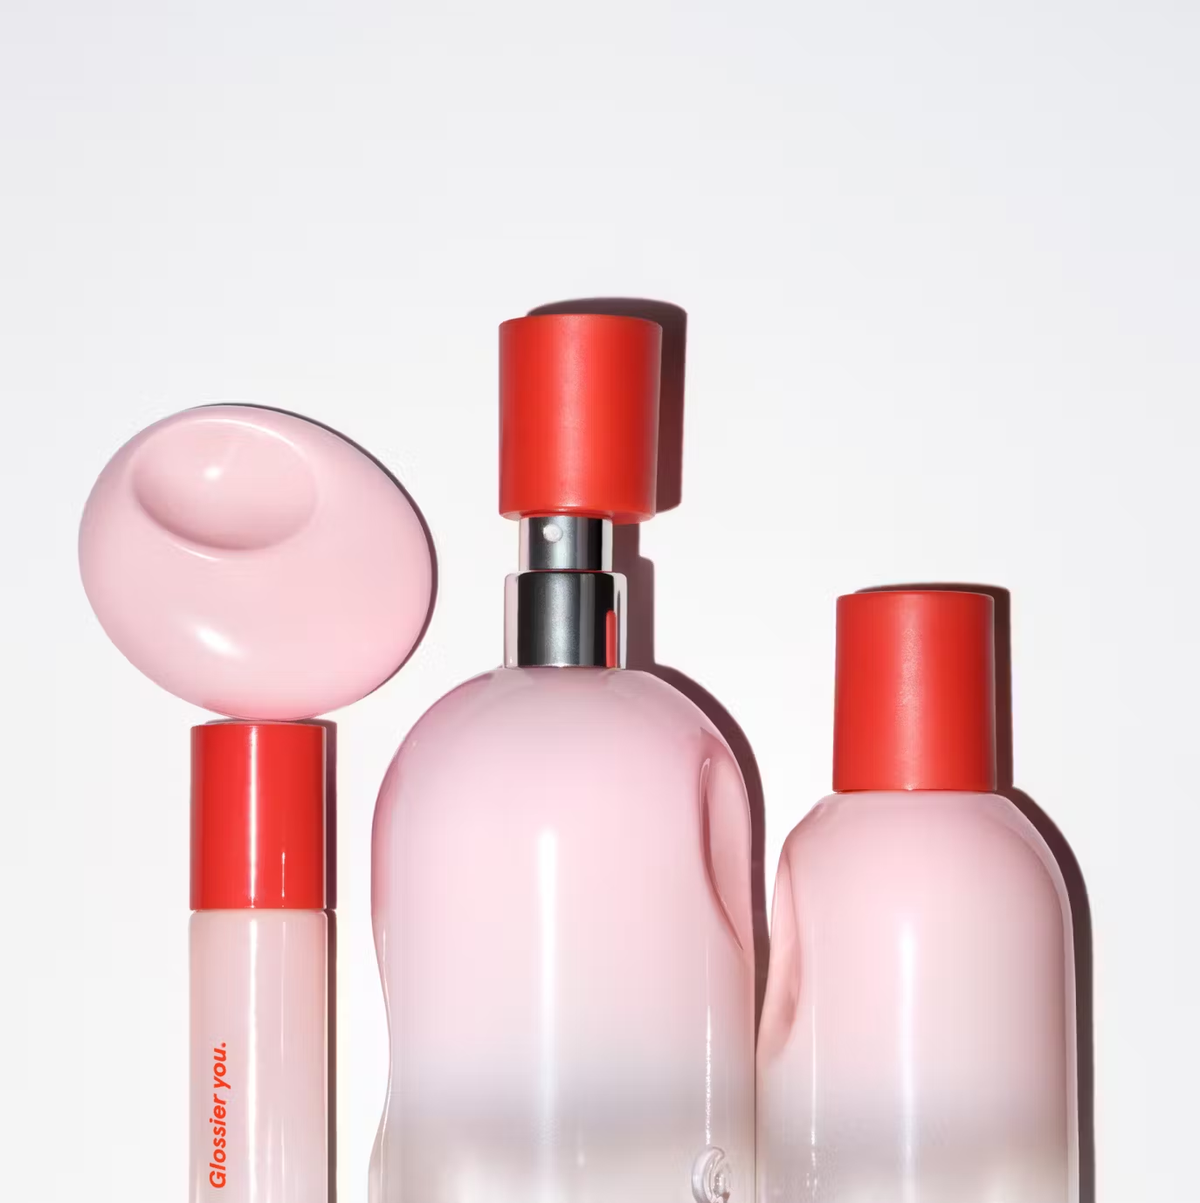 New Glossier You XL is a jumbo bottle of the cult fragrance